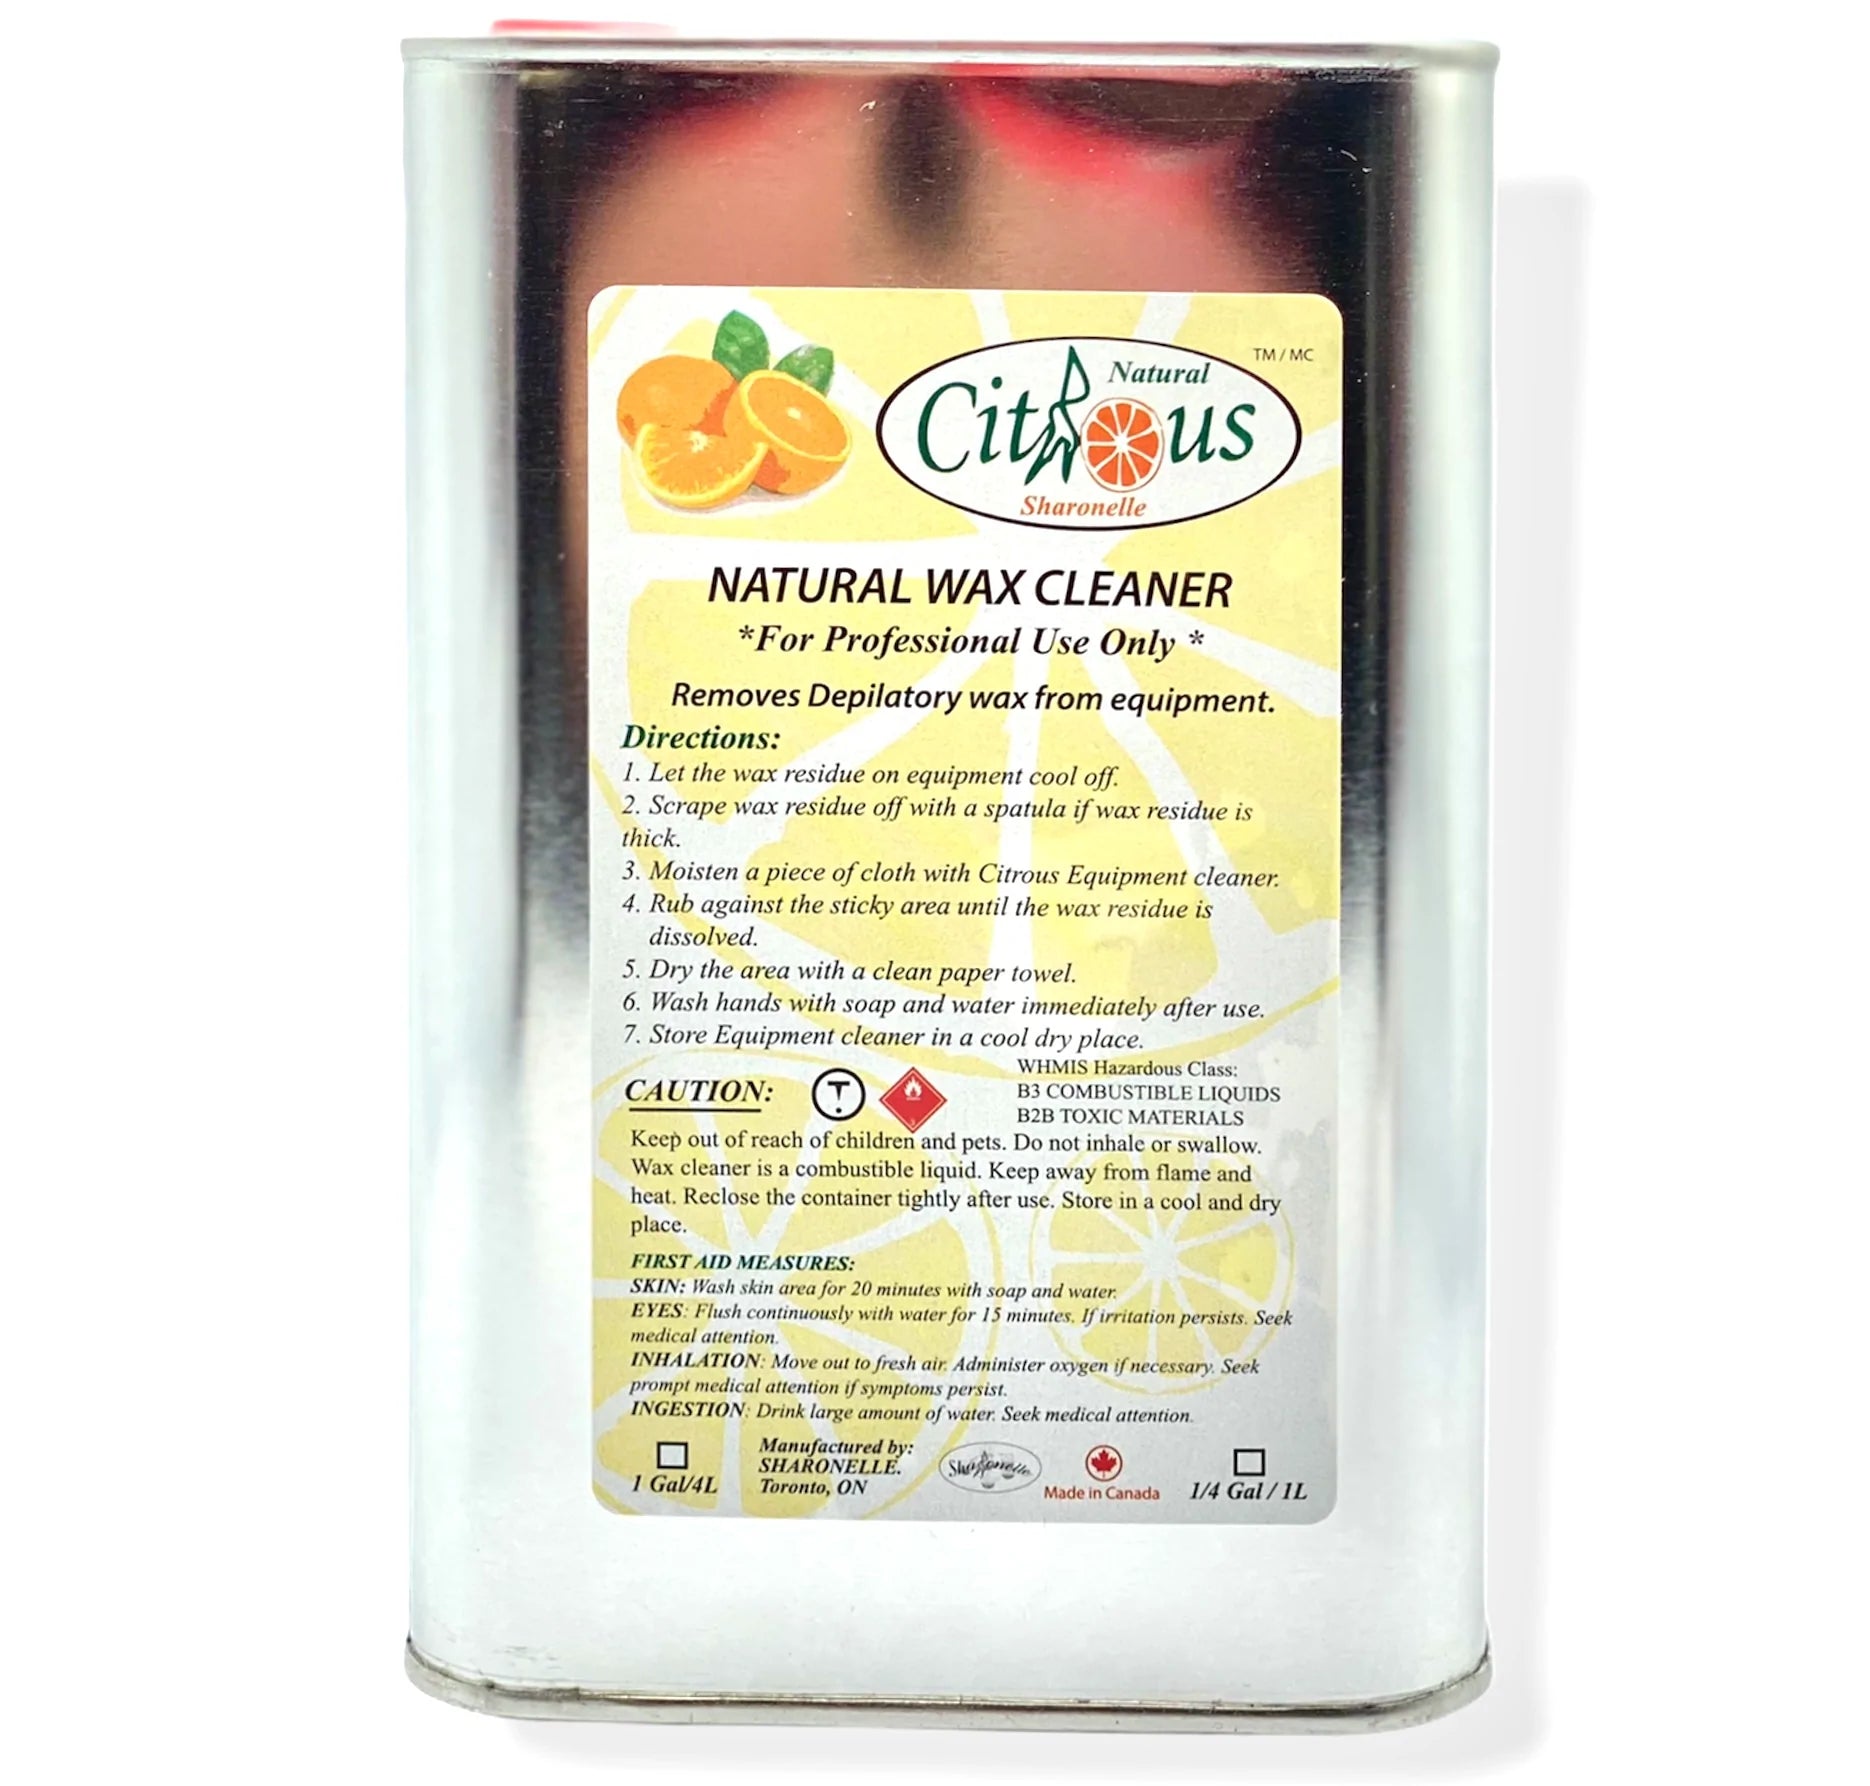 SHARONELLE CITRUS NATURAL WAX CLEANER 4L